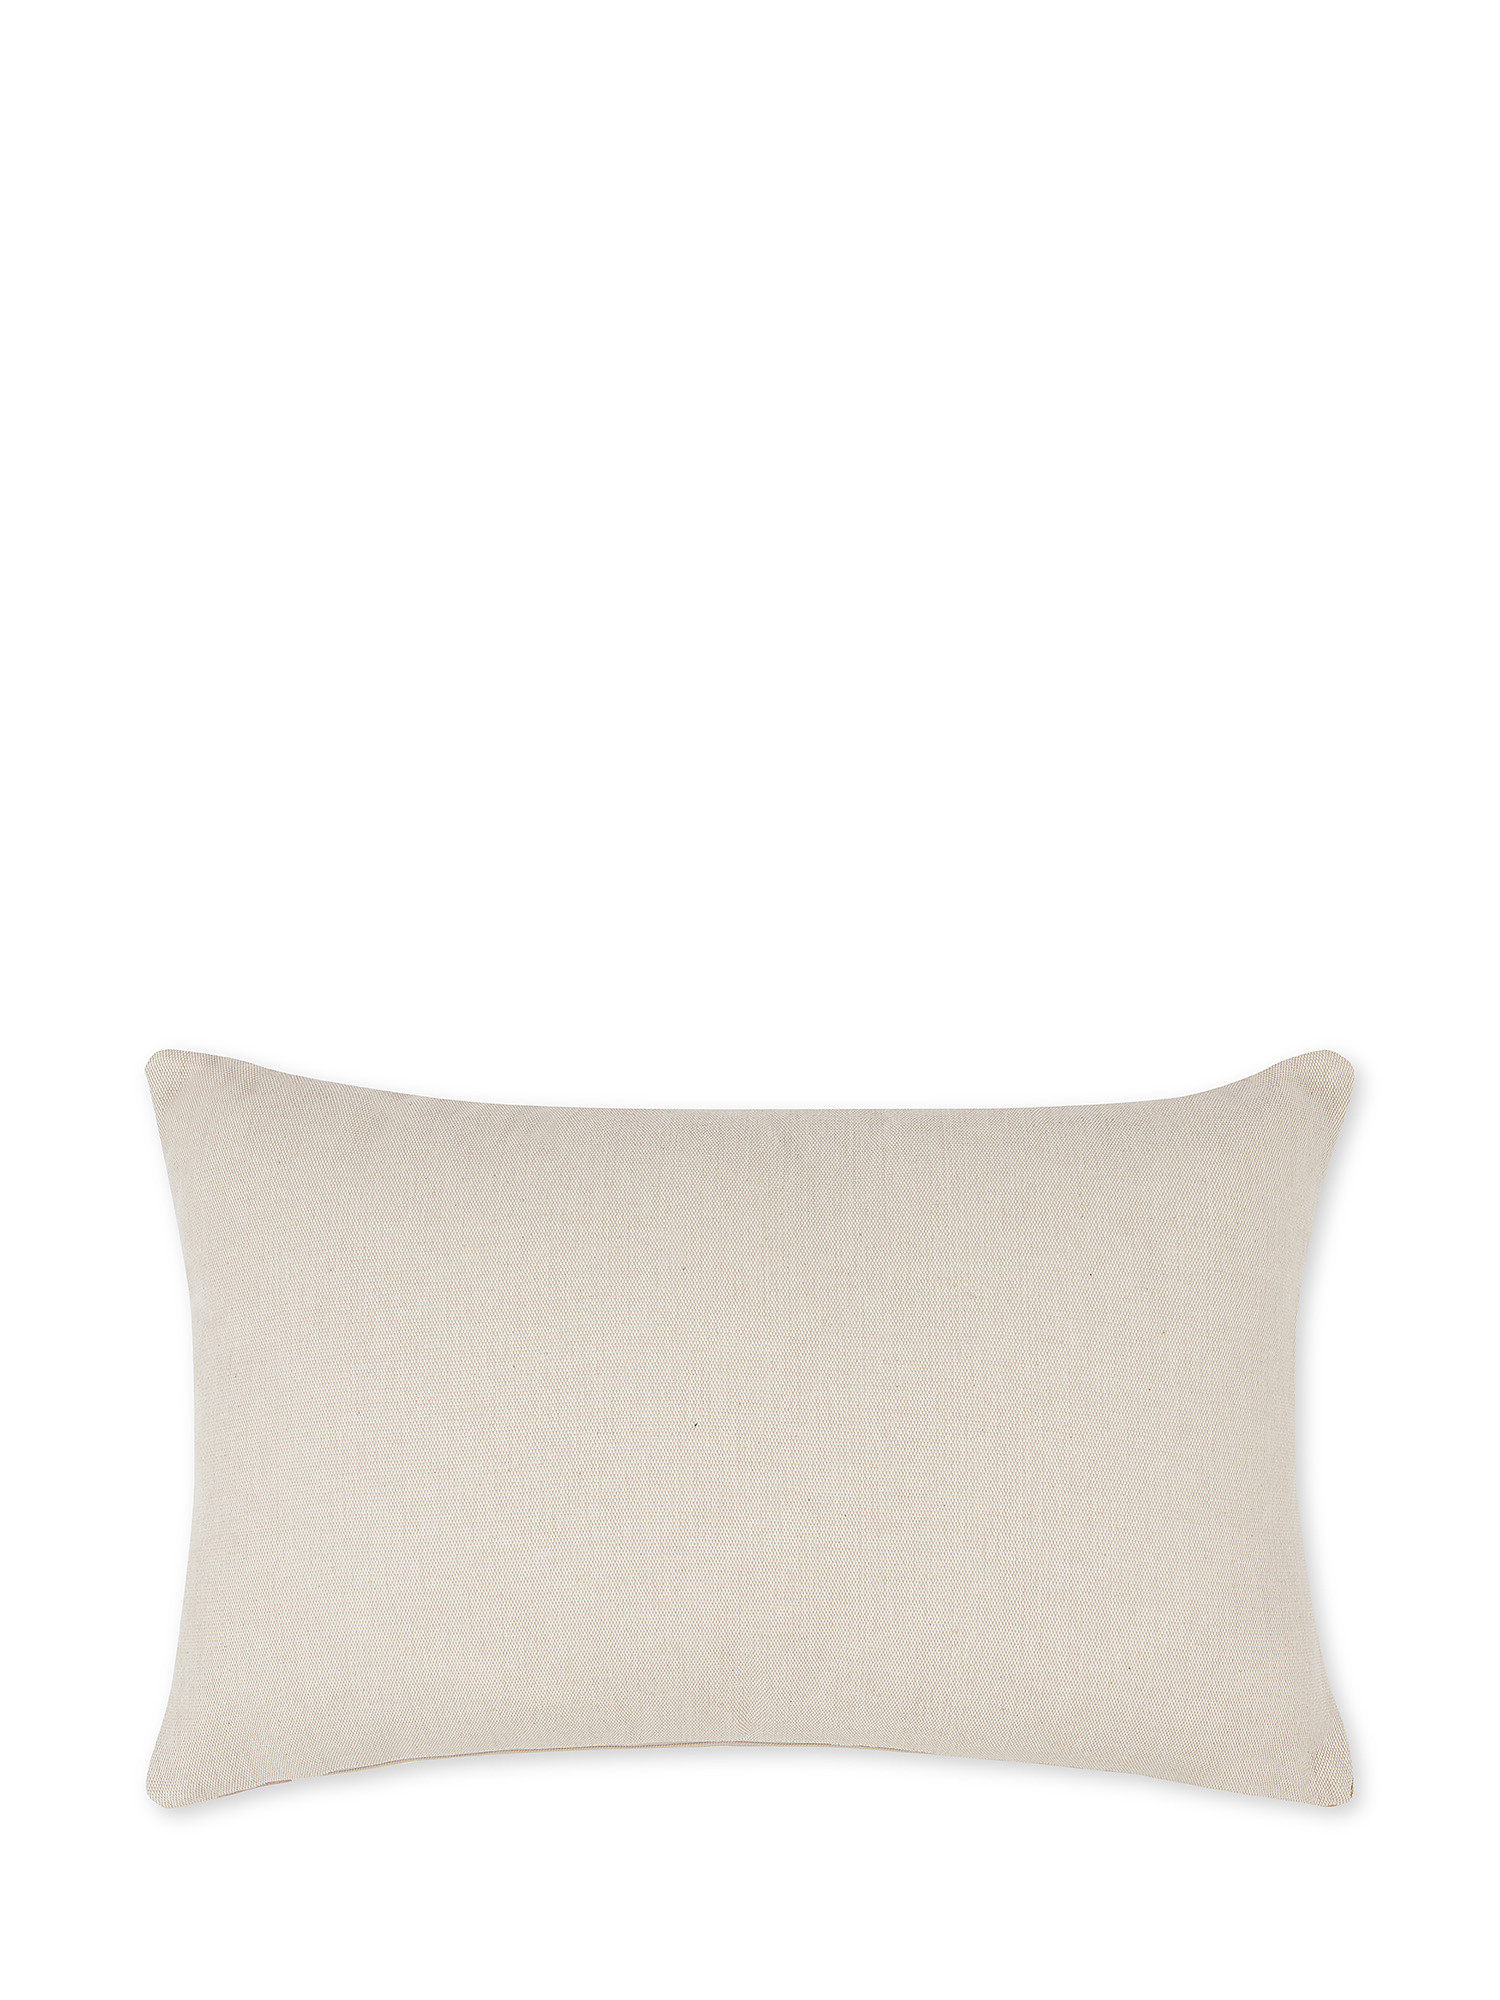 Cushion 35x55 cm with striped pattern, White / Beige, large image number 1